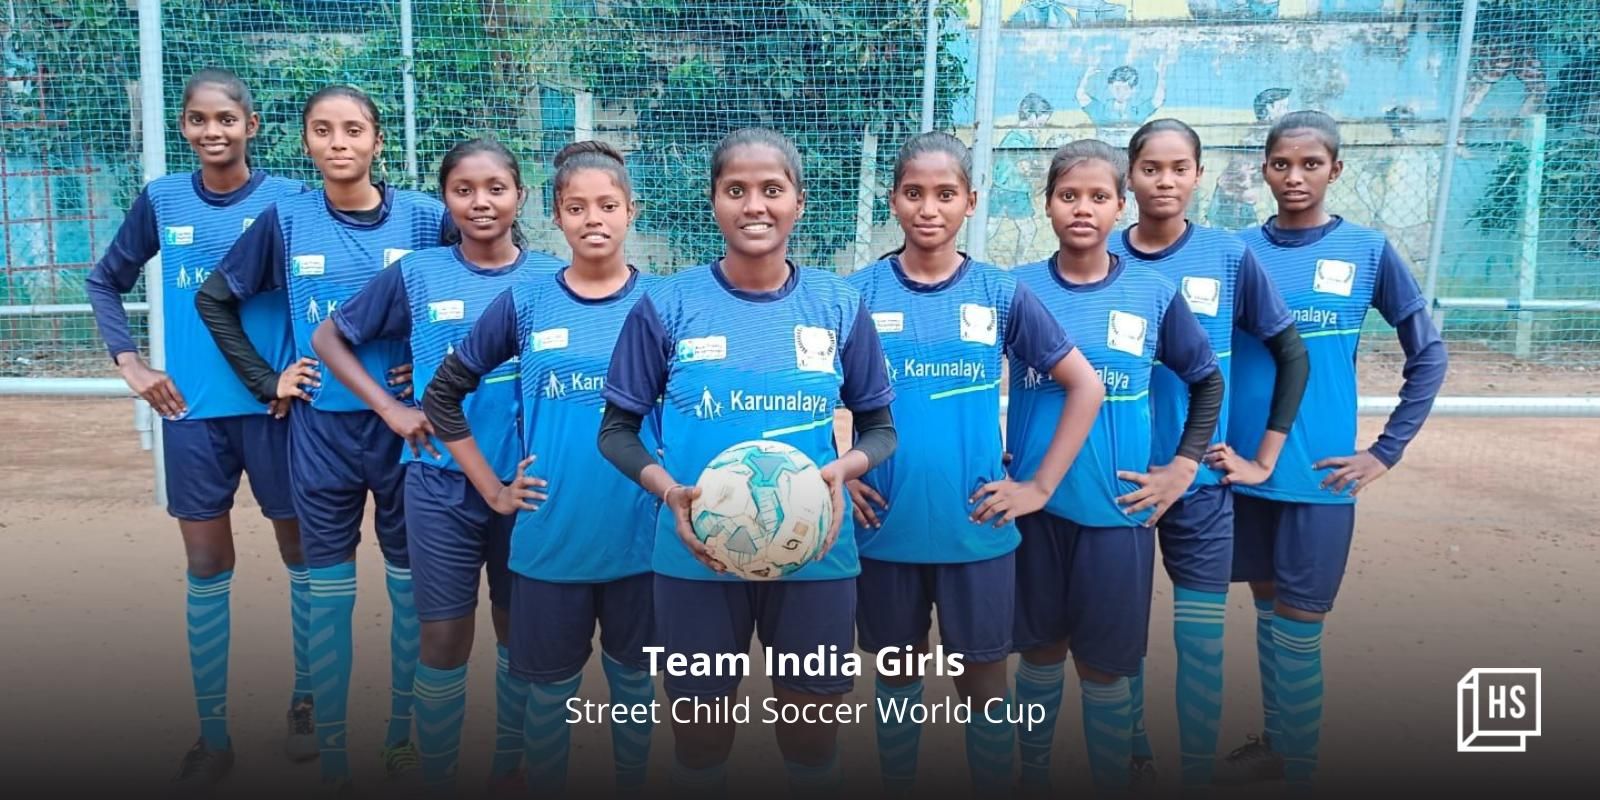 Meet the Chennai girls representing India at the Street Child World Cup in Doha 

